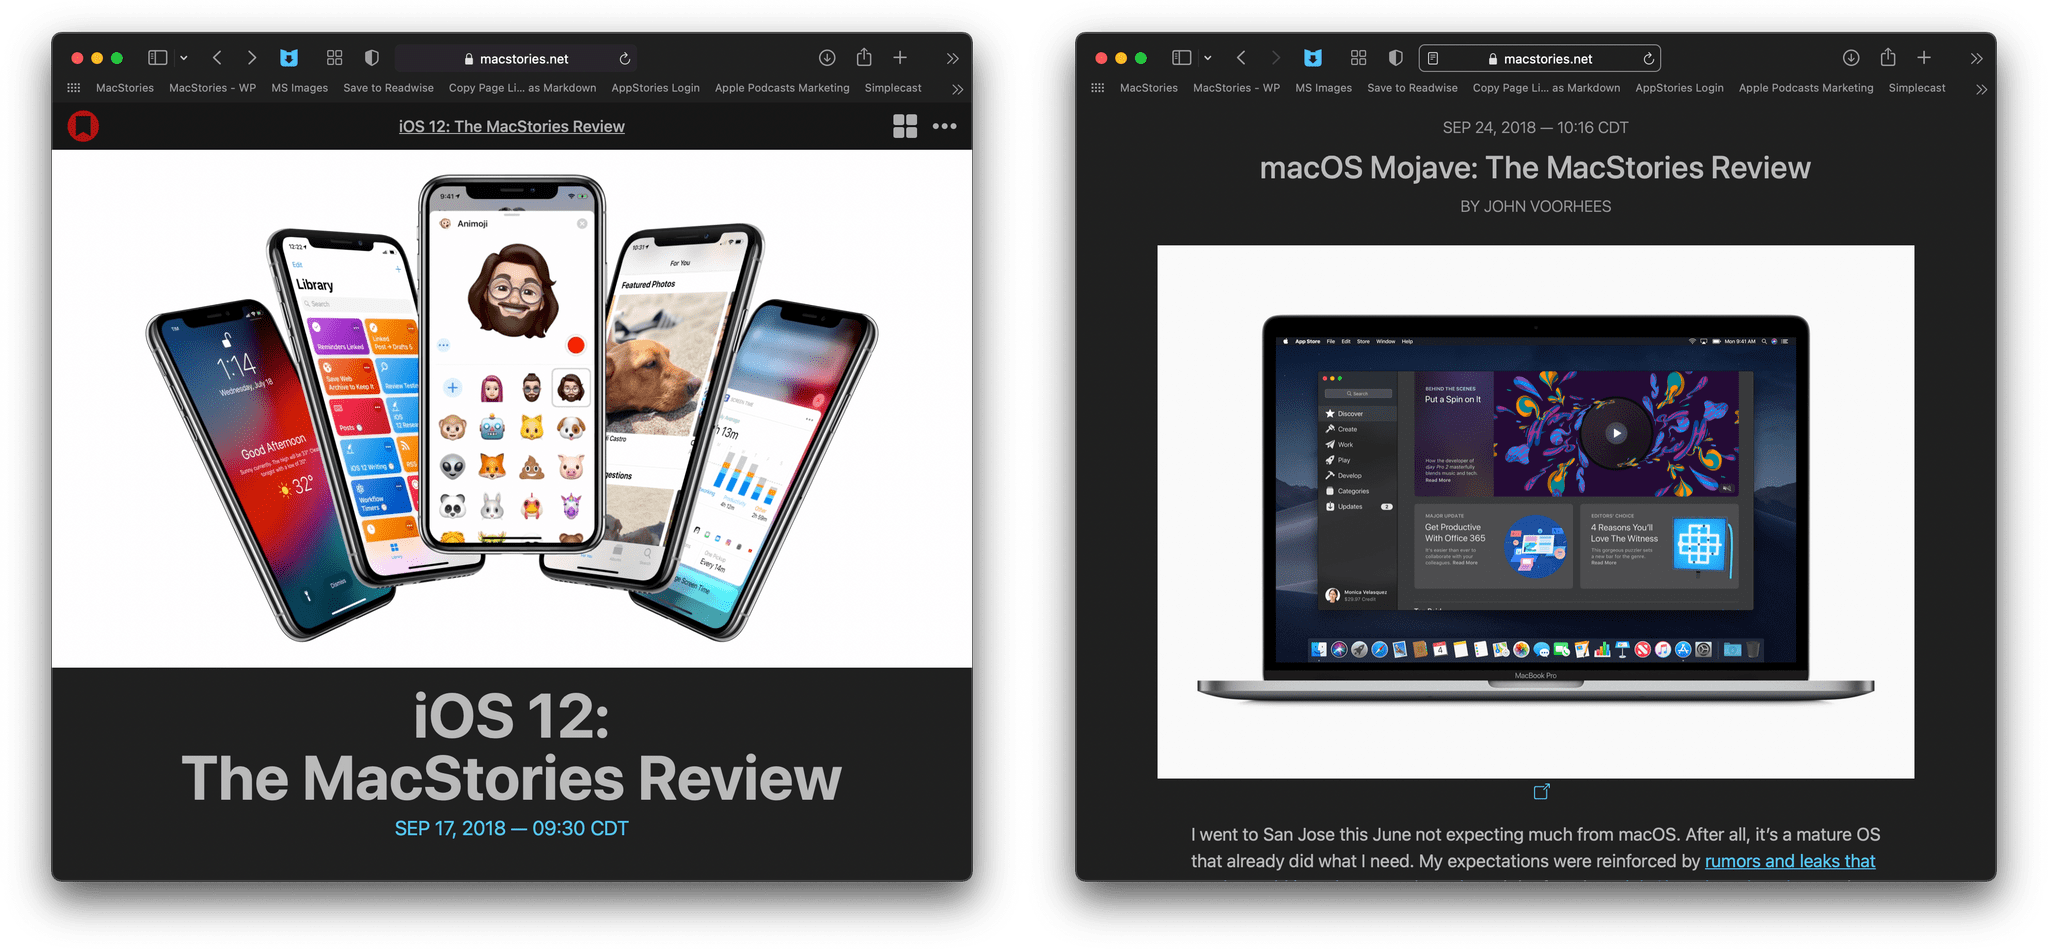 In 2018, there was virtually no overlap between our iOS and macOS reviews. Today, Apple's system apps are being developed in sync.